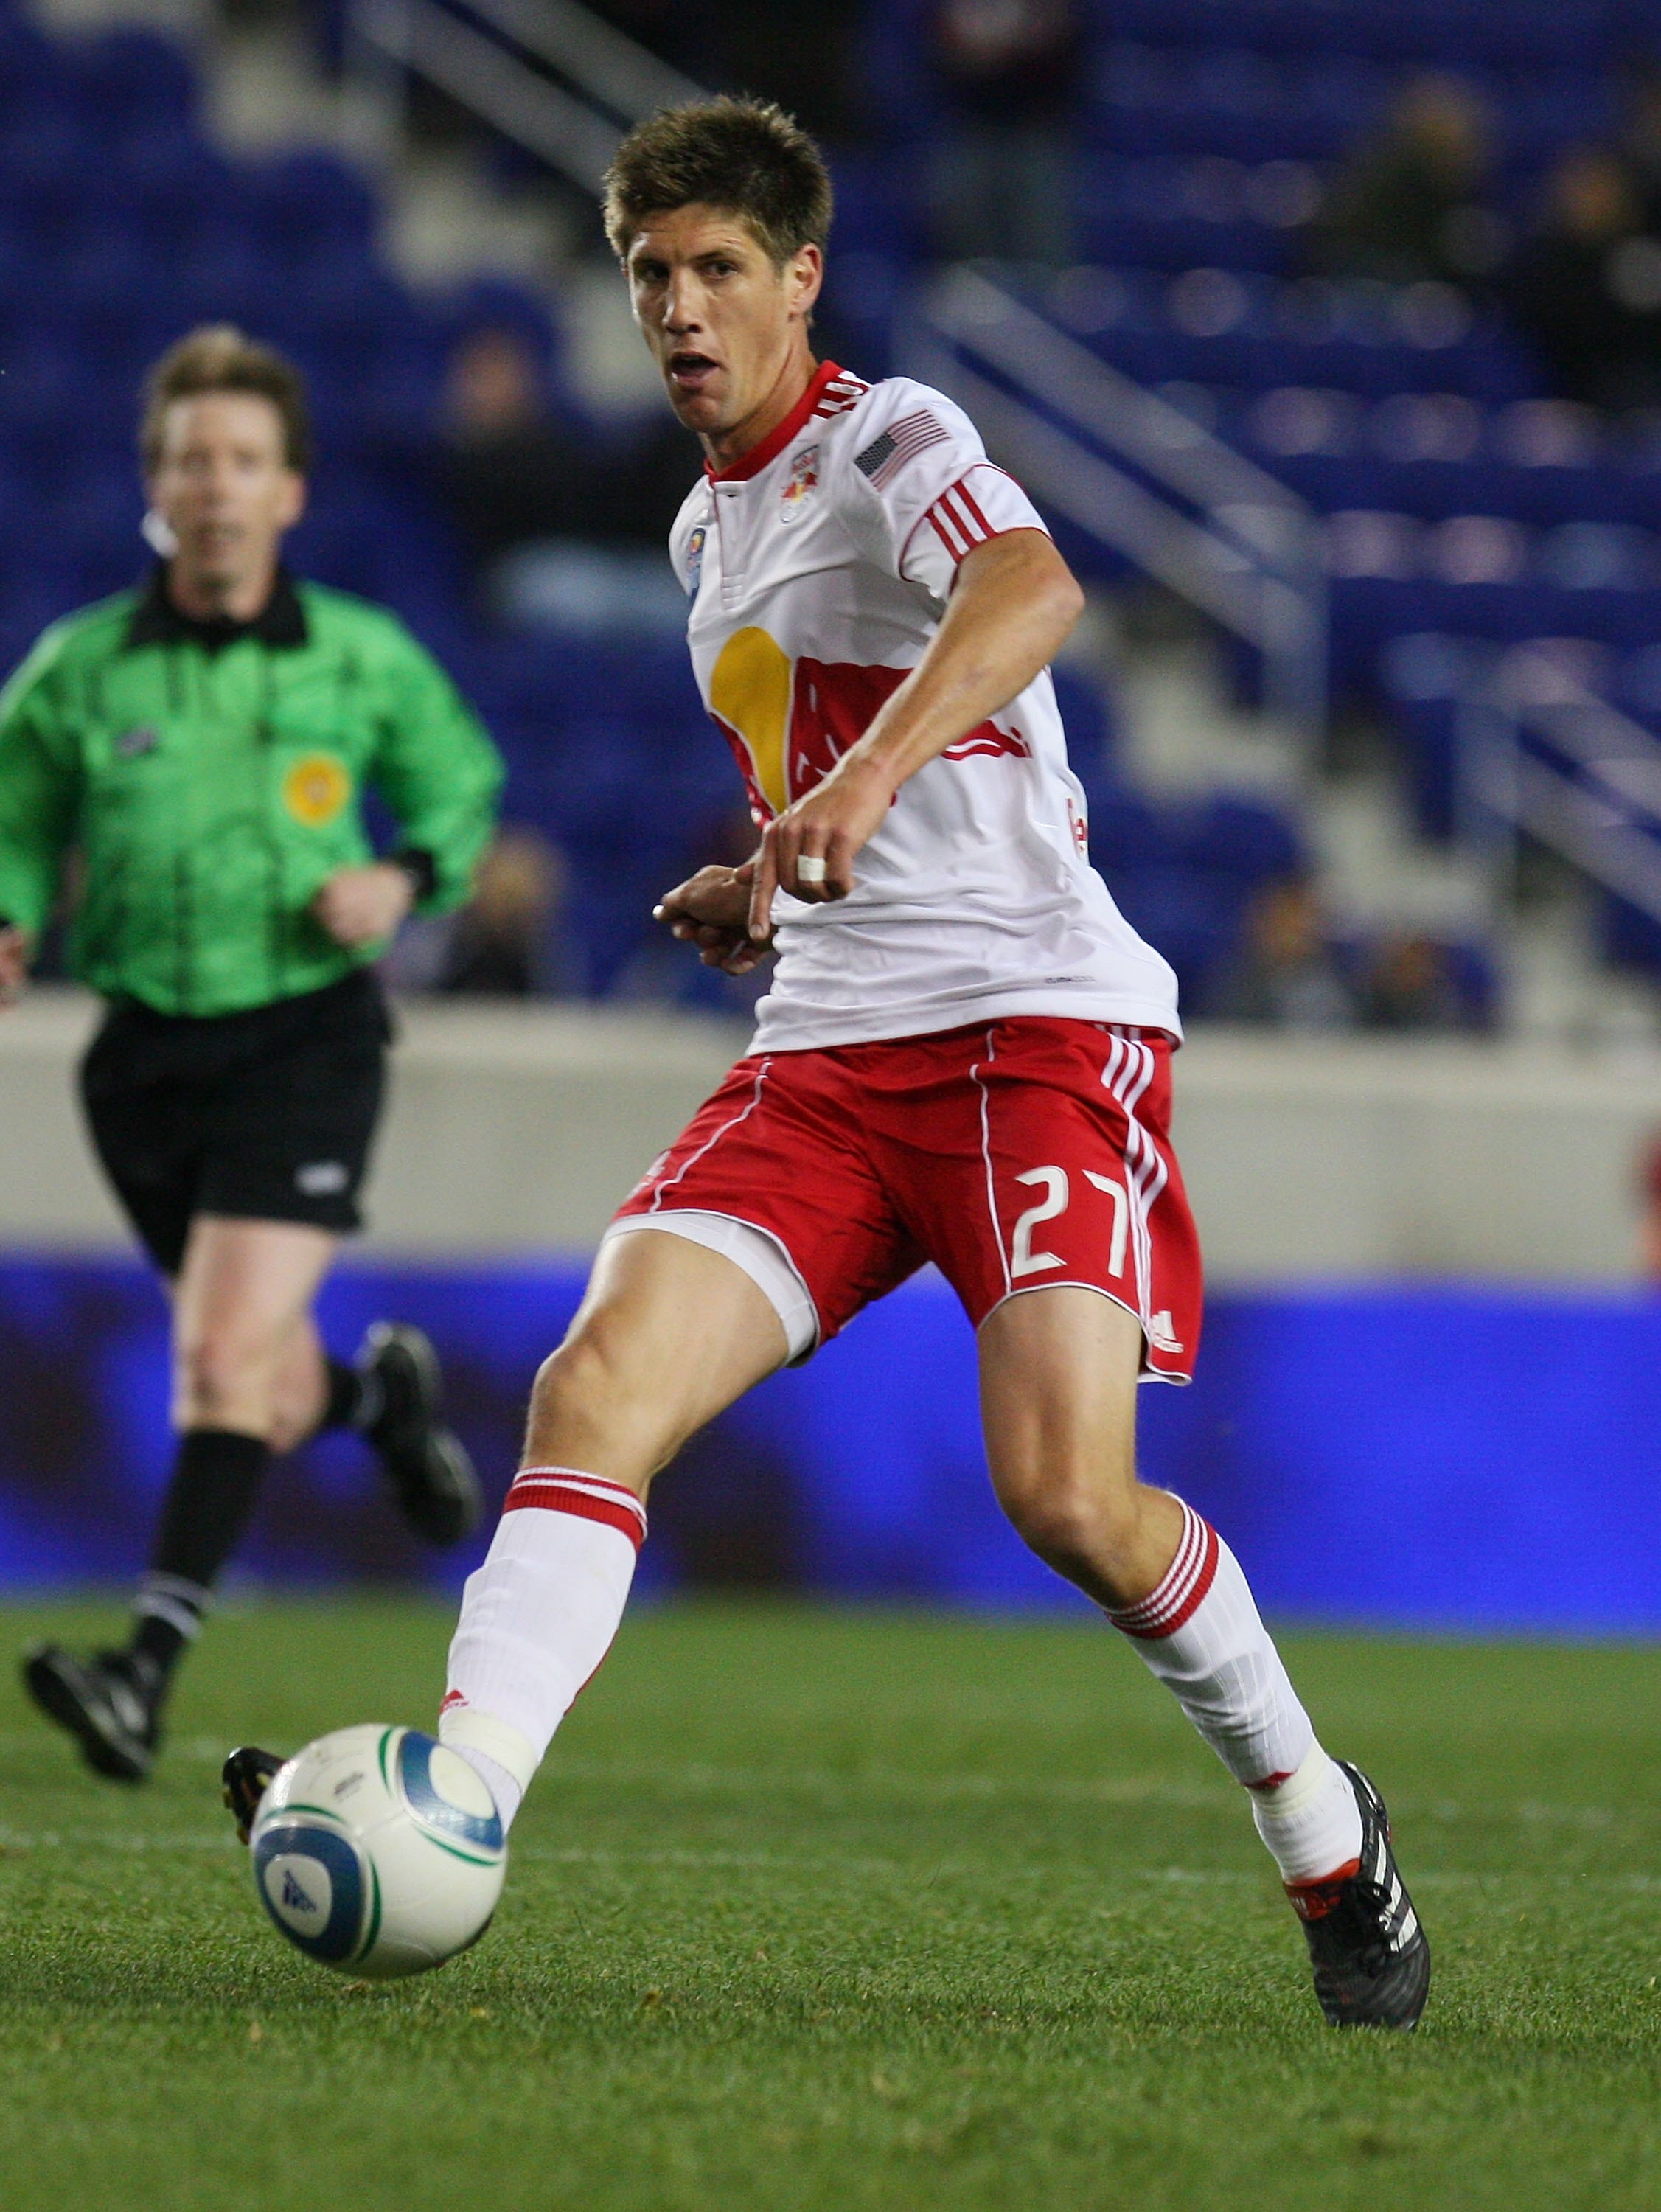 HARRISON, NJ - APRIL 27:  Andrew Boyens #27 of the New York Red Bulls plays the ball against the Philadelphia Union during the US Open Cup qualifying match on April 27, 2010 at Red Bull Arena in Harrison, New Jersey. Red Bulls defeated the Union 2-1.  (Ph